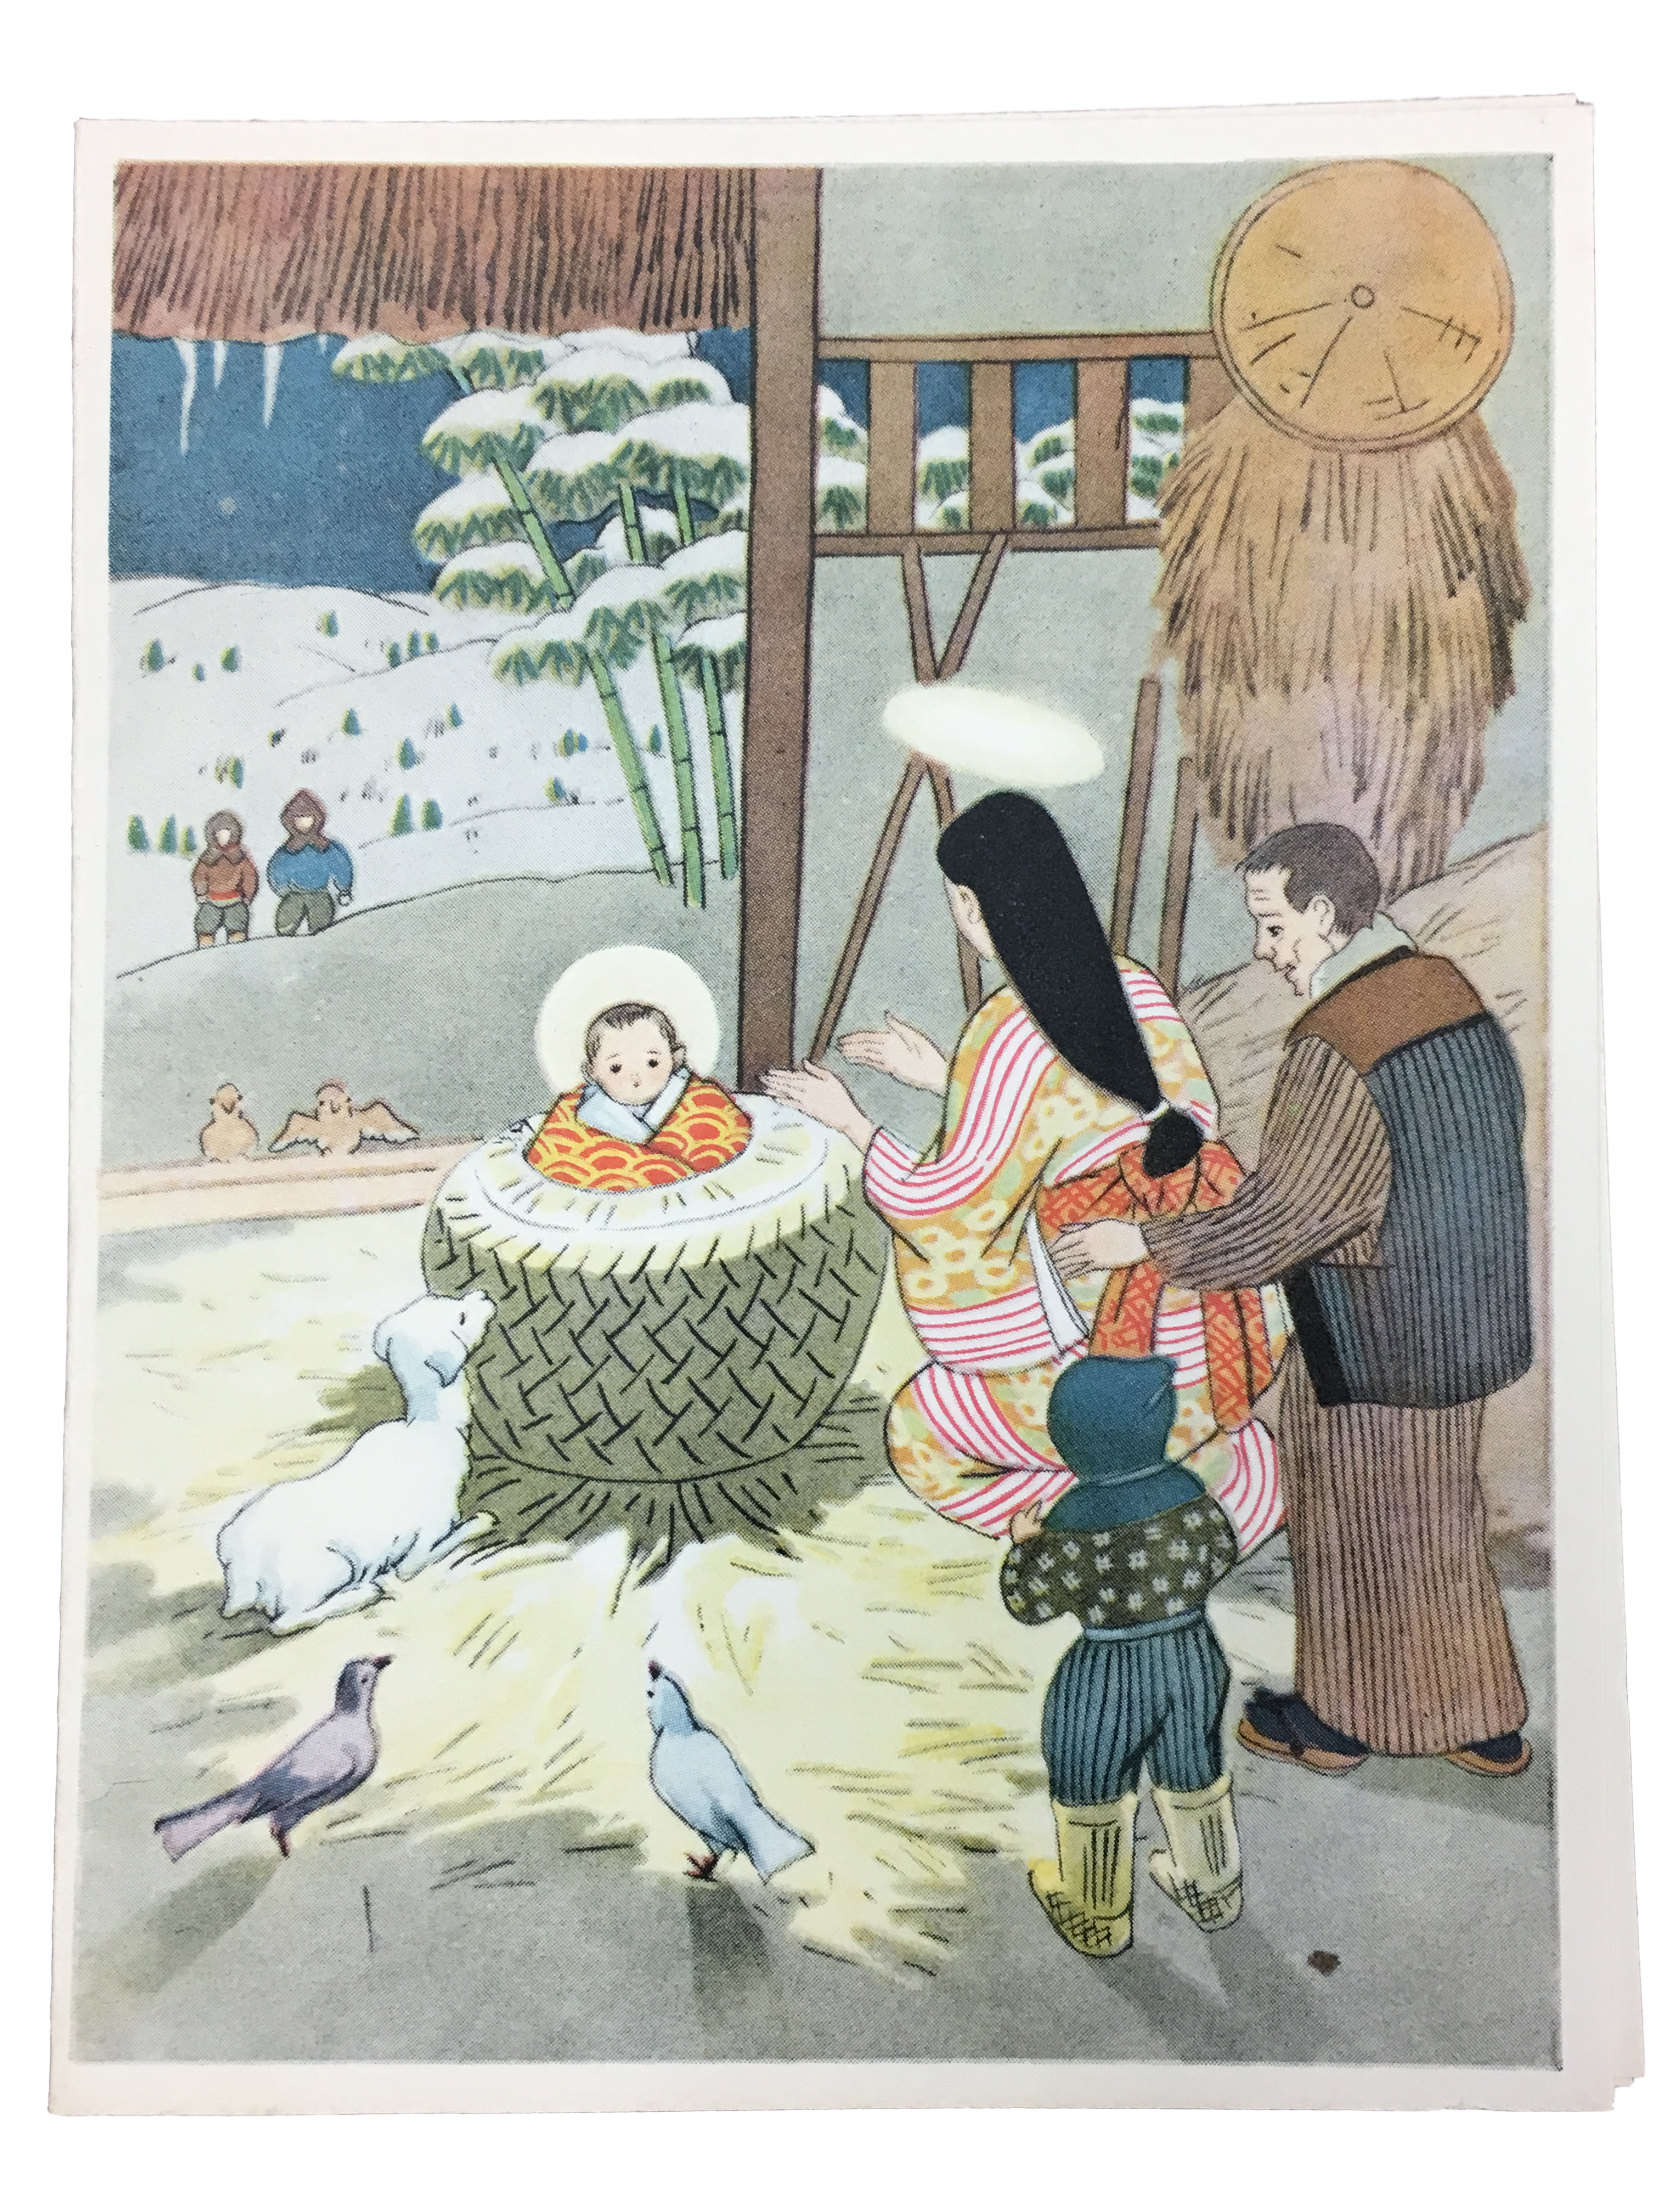 Japanese Christmas card taken from the International and cultural Christmas cards collection of the Marian Library